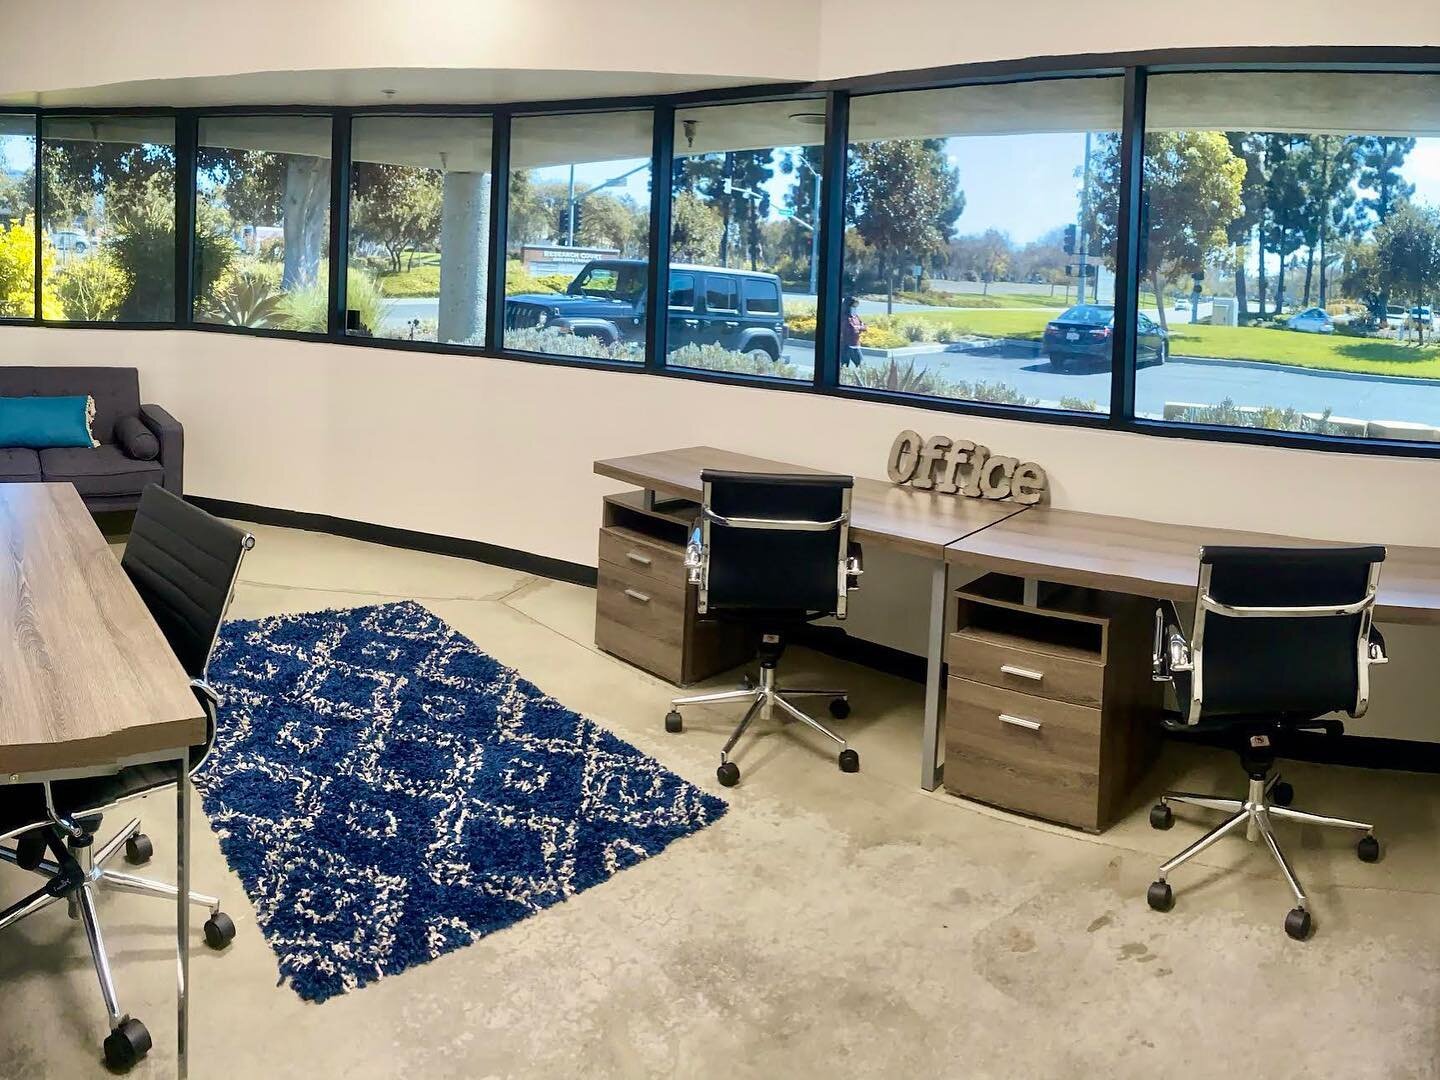 Ready to revamp your remote office? Starting at $295 a month, the Dedicated Desks at WorkSpace Carlsbad combine the privacy of a locking office with the collaborative spirit of a shared professional space, PLUS access to all of our amenities. DM us f